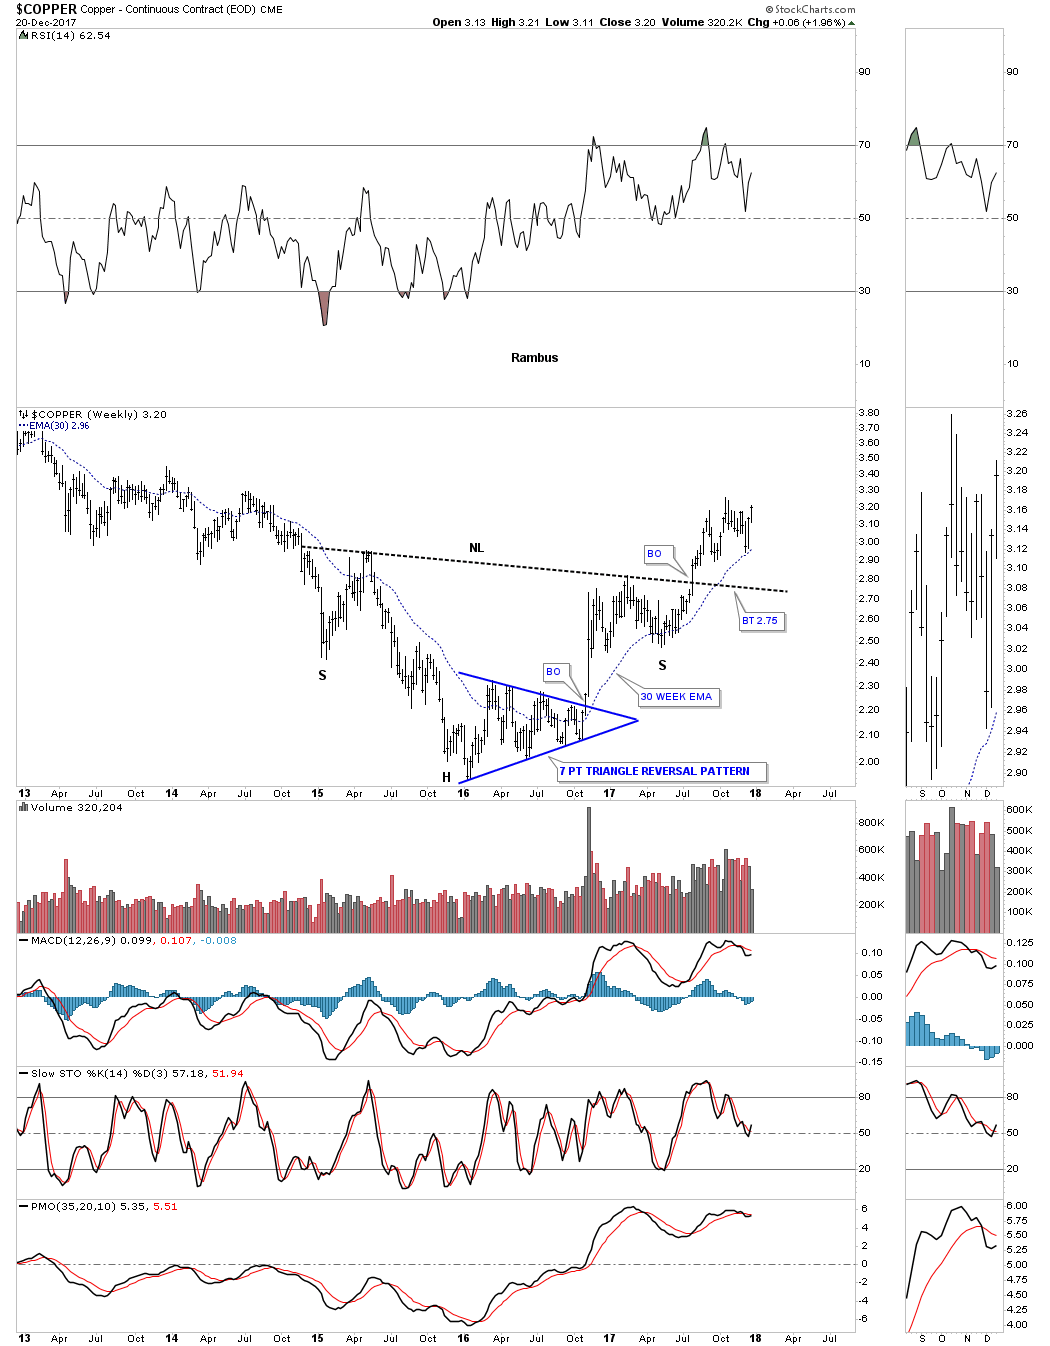 Copper Weekly 2013-2017